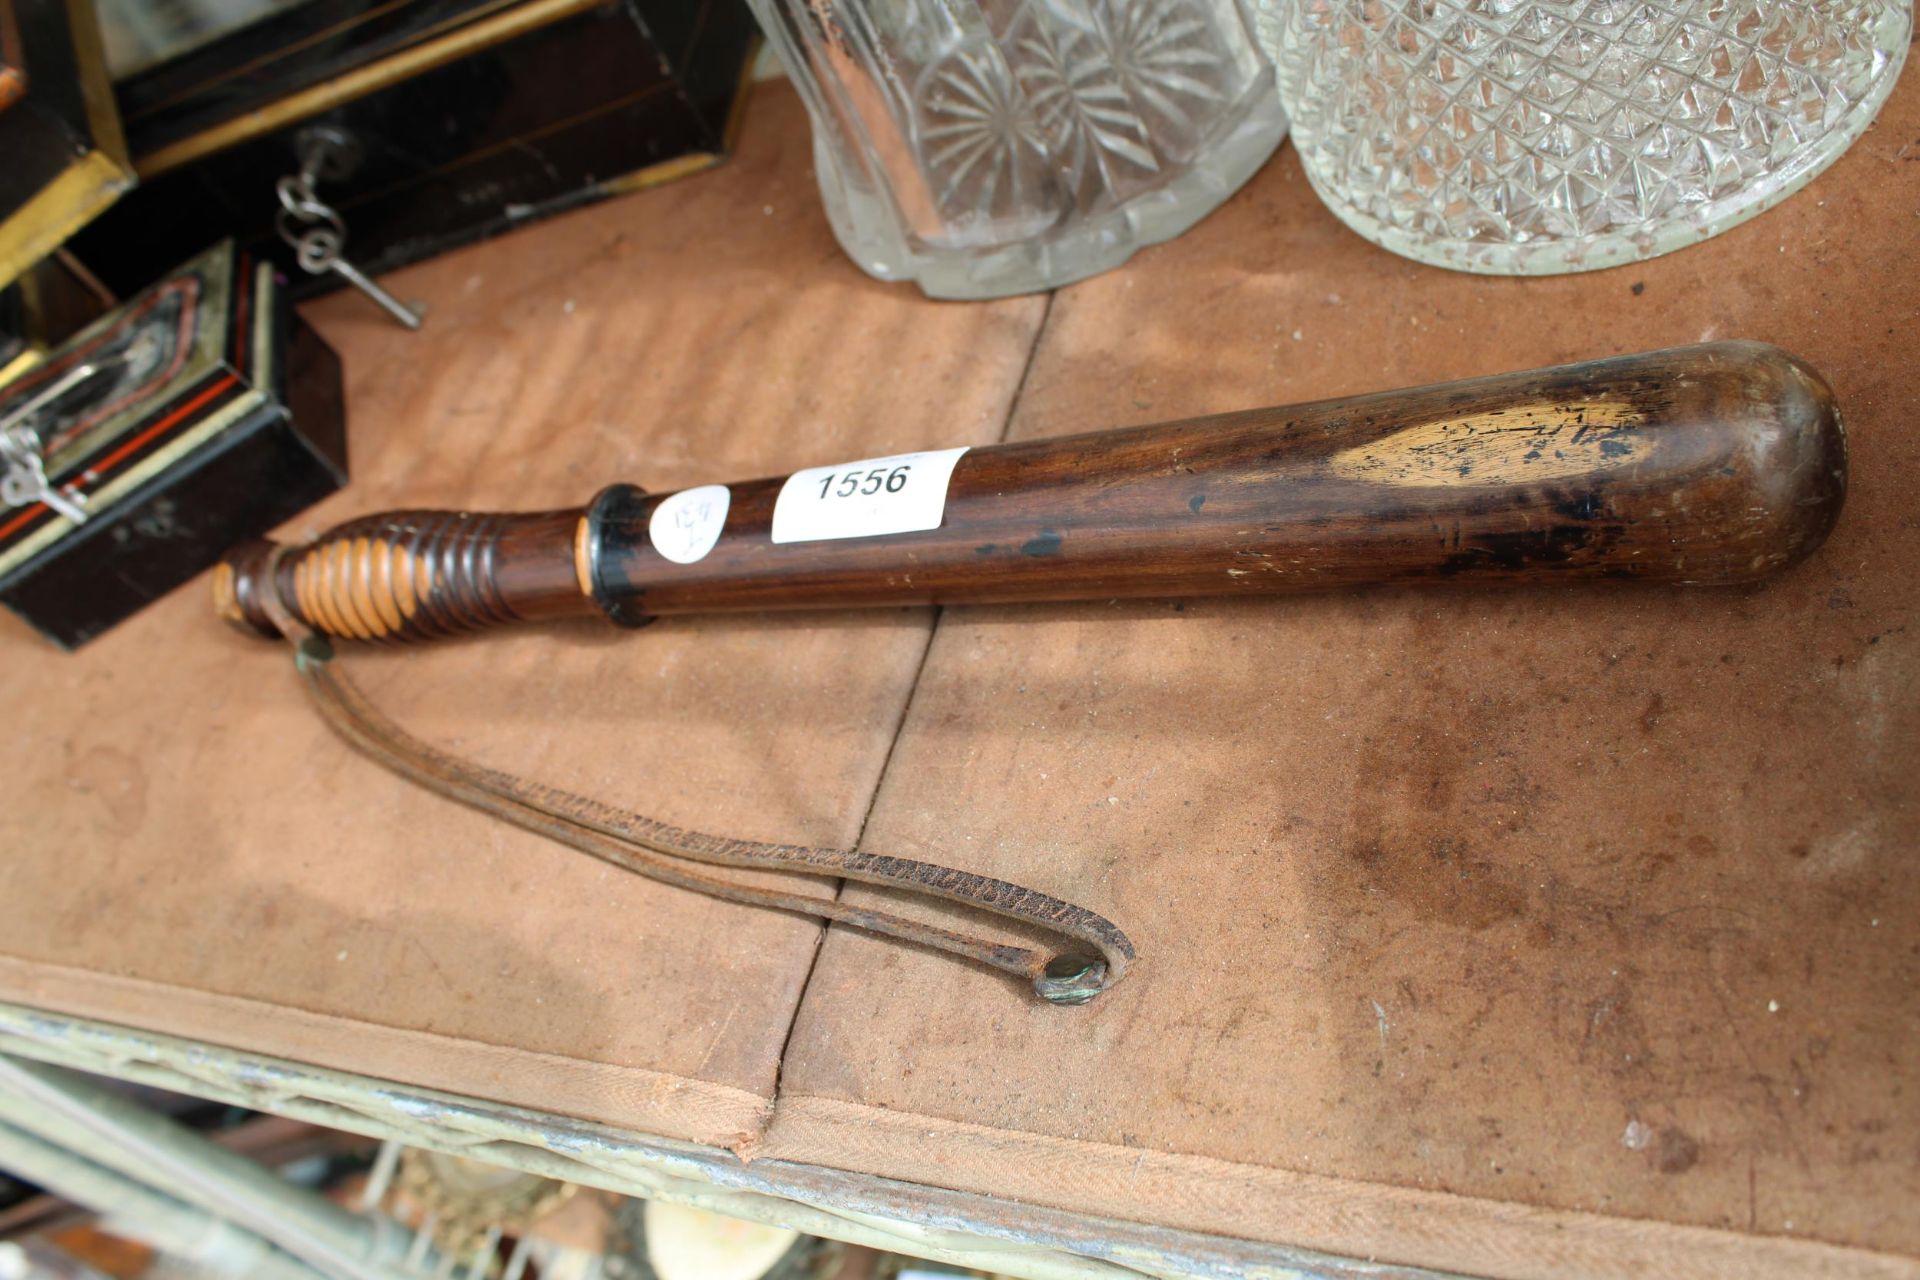 A VINTAGE WOODEN POLICE TRUNCHEON - Image 2 of 2